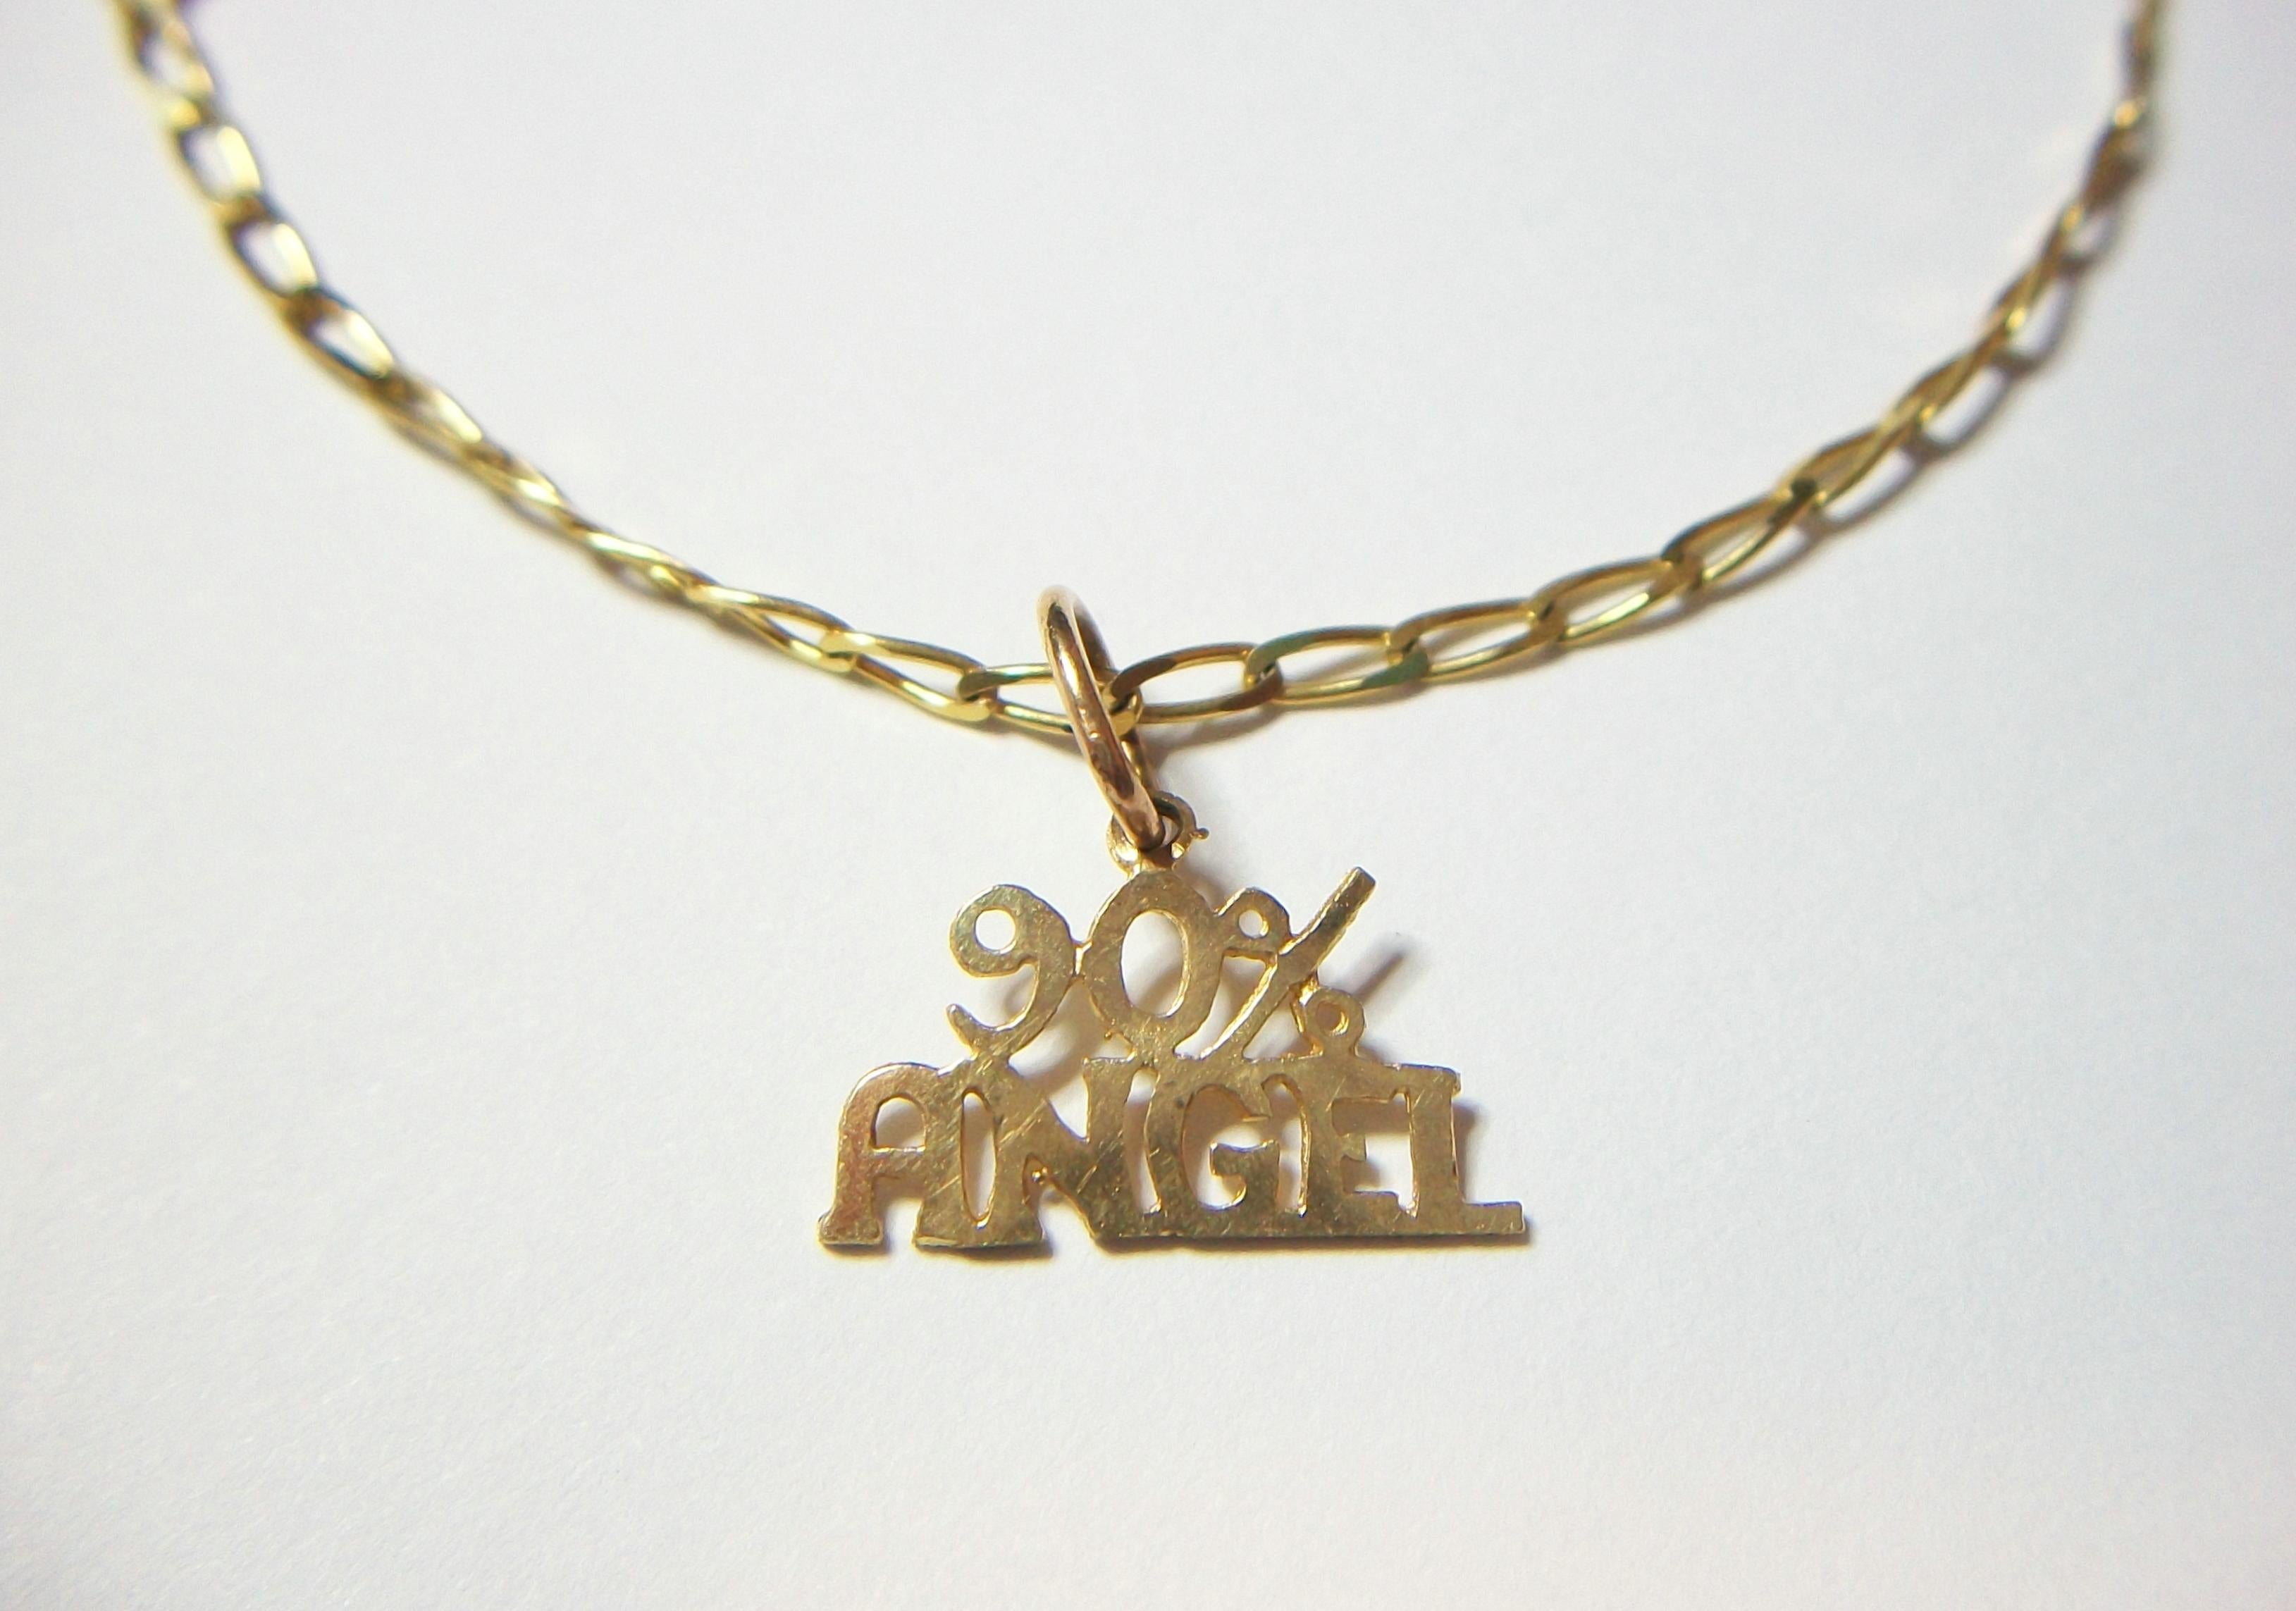 Vintage 10K or 417 yellow gold curb chain link bracelet - '90% ANGEL' charm - signed 'JL' and stamped 10K on the back of the charm - Italy - late 20th century.

Excellent vintage condition - minor surface scratches from age and use - no loss - no